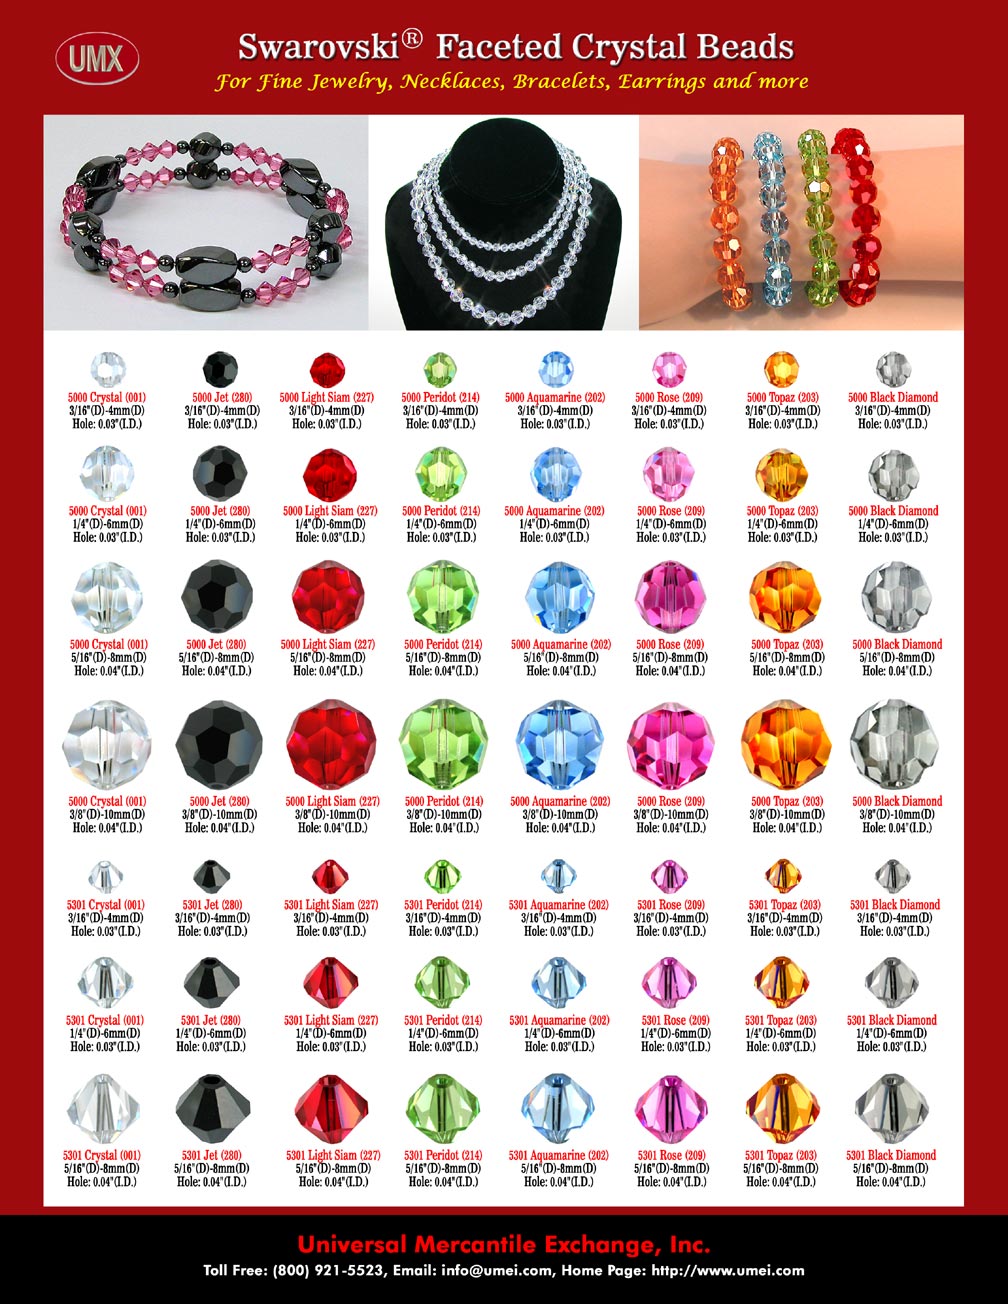 Please check our online catalogs for crystal clear color, jet, light Siam, peridot, aquamarine, rose, Topaz and black diamond colors faceted round crystal beads and faceted diamond crystal beads.